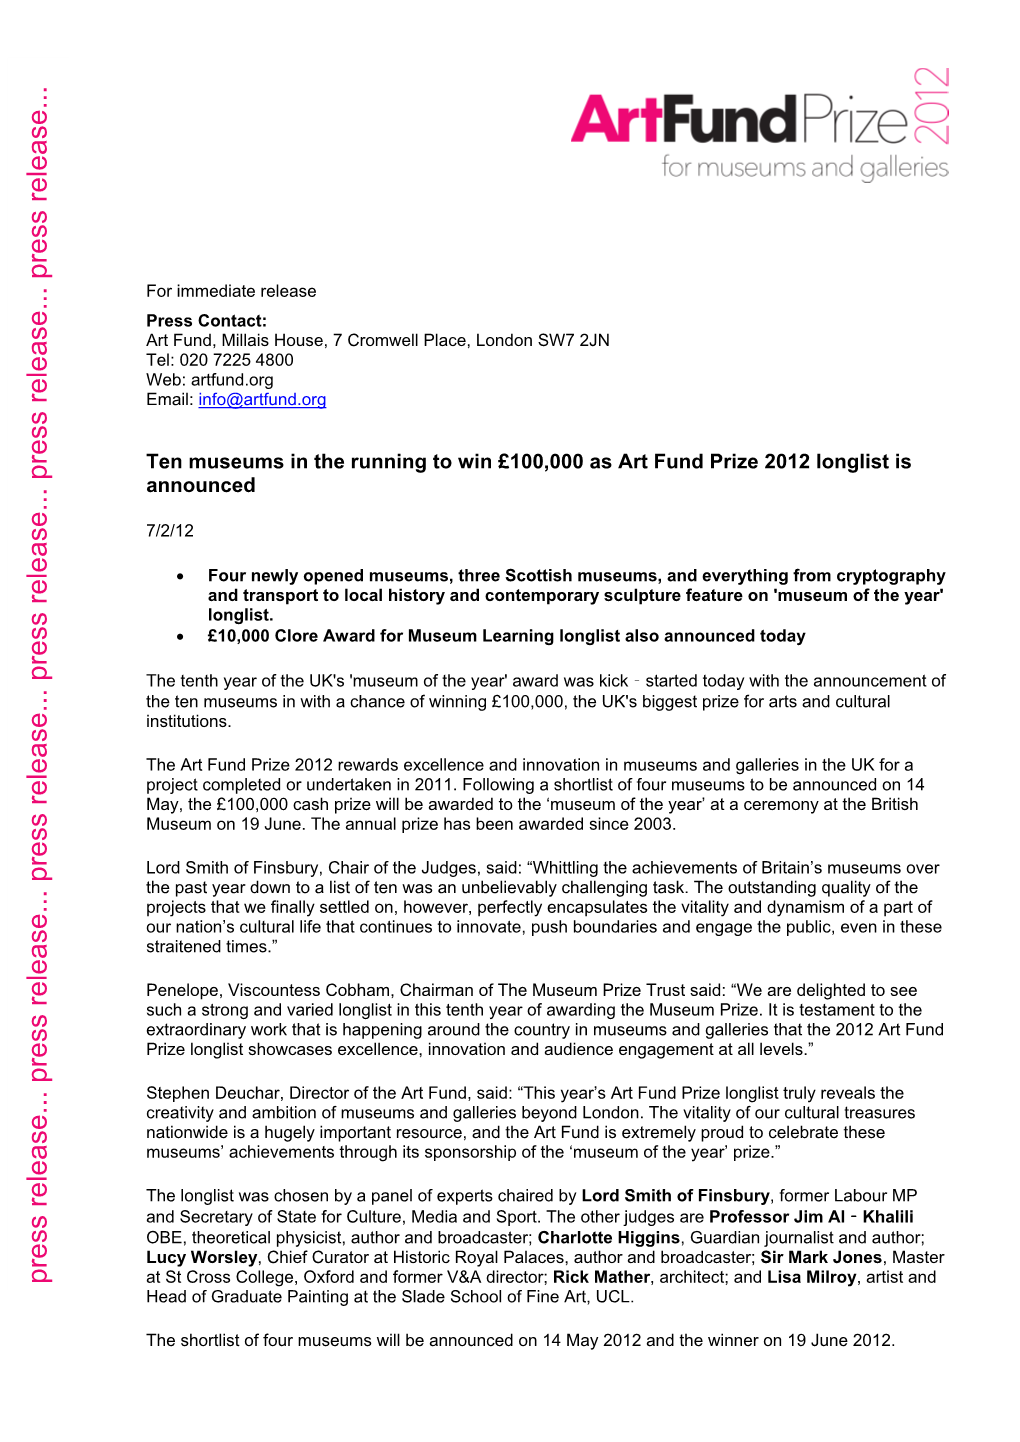 For Immediate Release Press Contact: Art Fund, Millais House, 7 Cromwell Place, London SW7 2JN Tel: 020 7225 4800 Web: Artfund.Org Email: Info@Artfund.Org